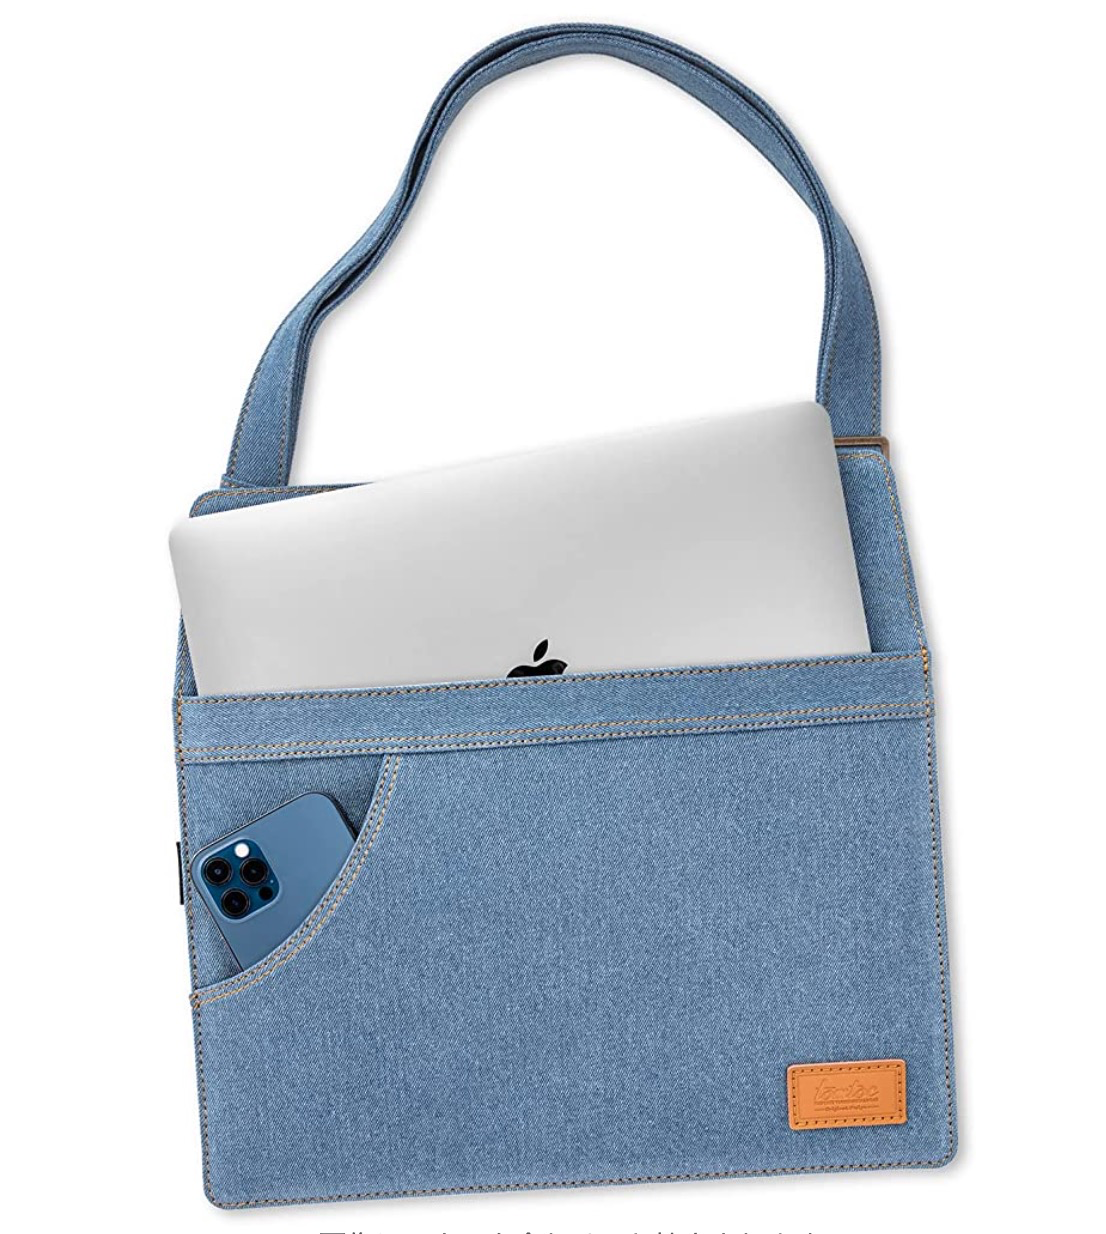 primary_Light-A26 Laptop Shoulder Bag for 13-inch MacBook Air And Pro